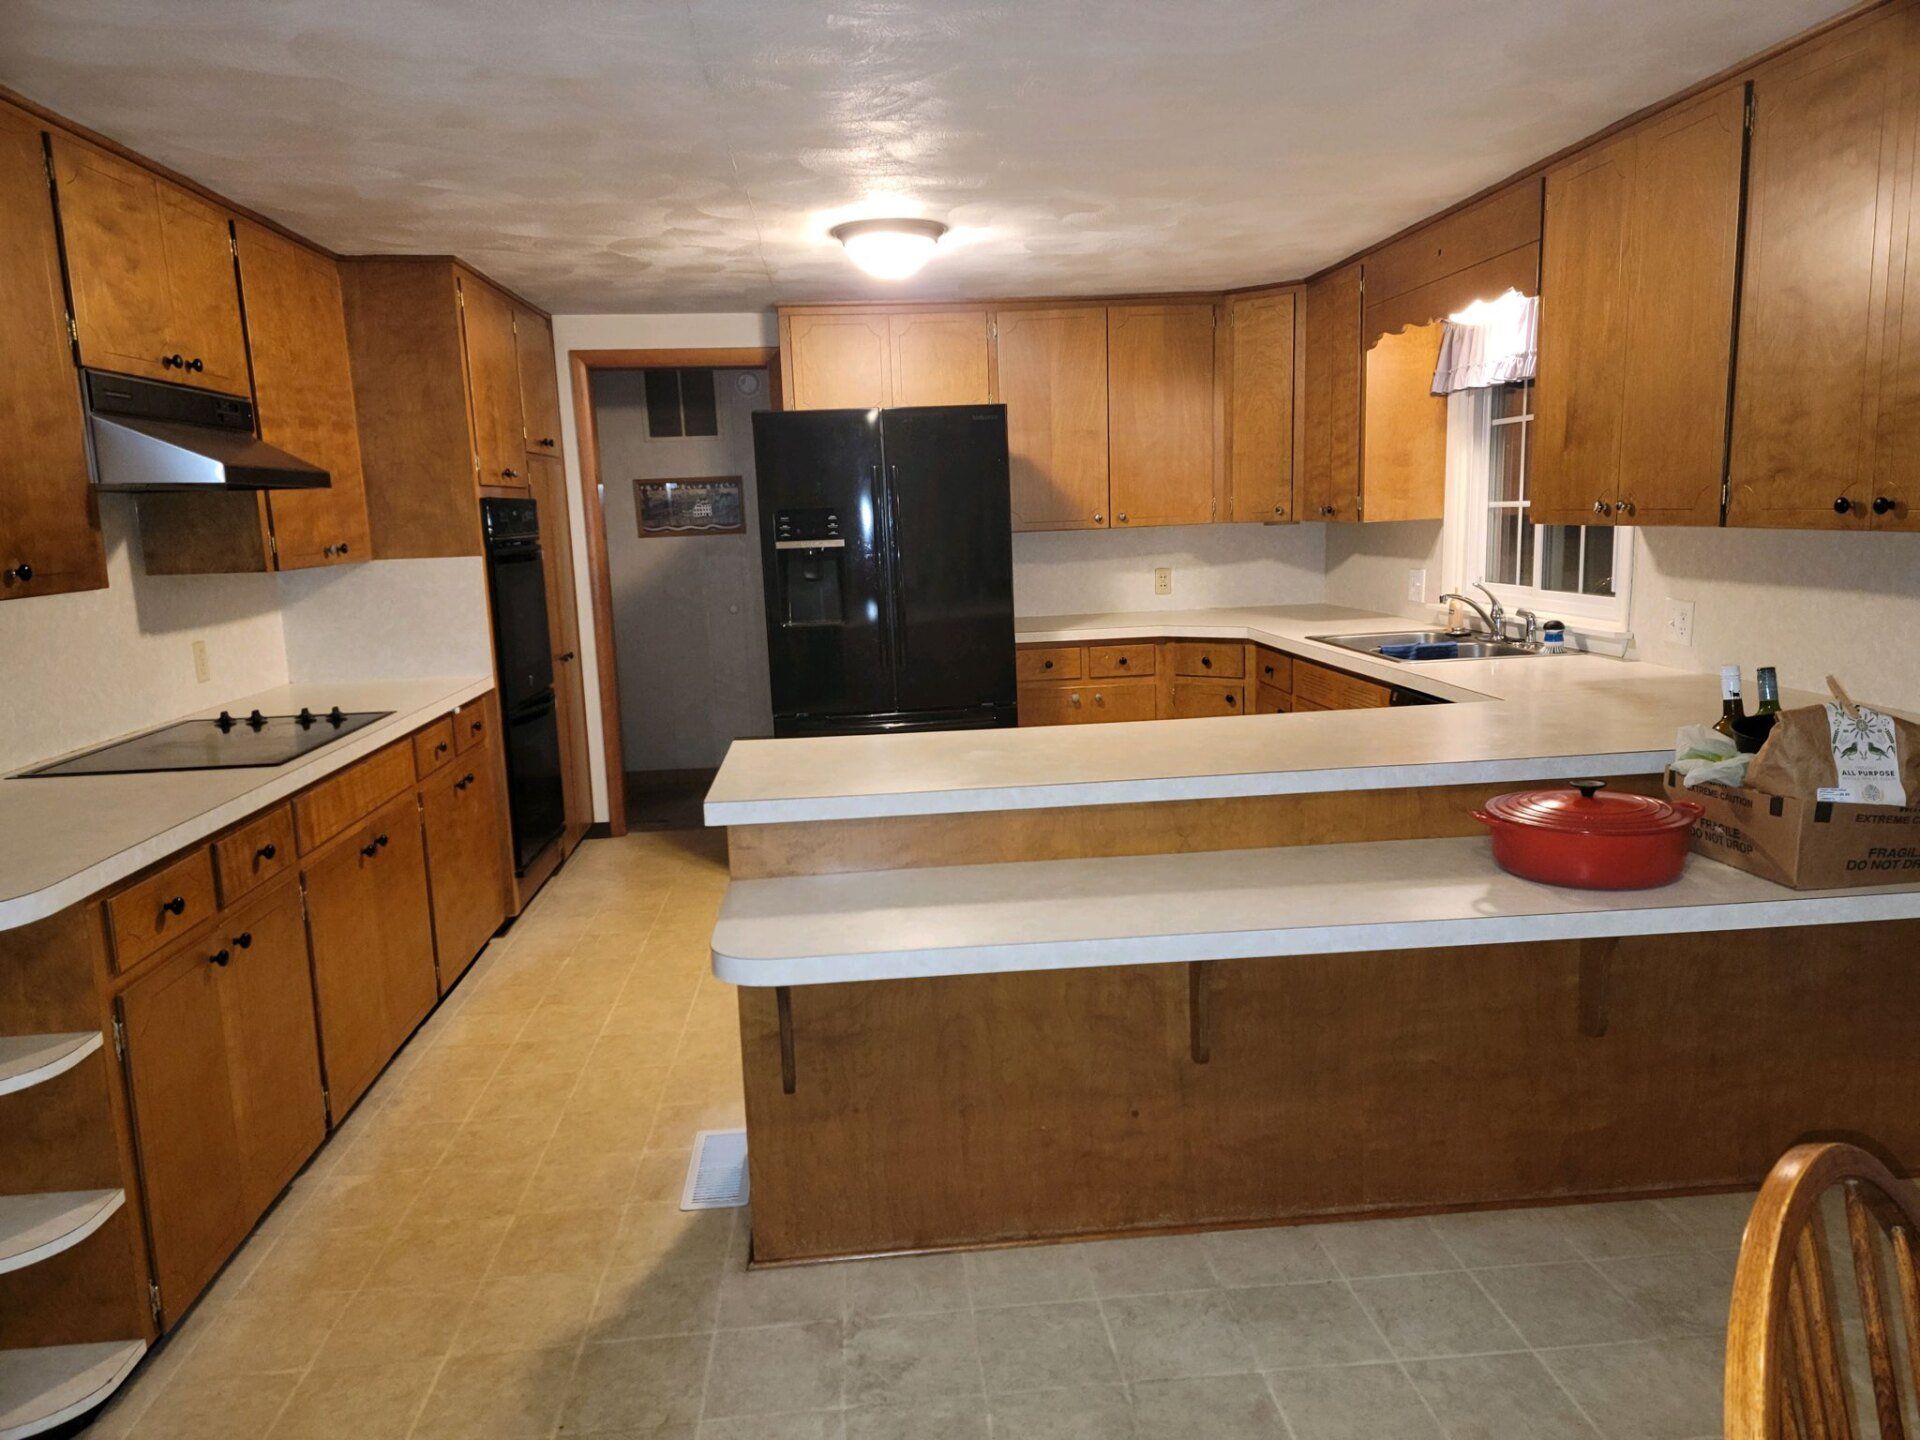 Before Long View Kitchen - Kitchen Remodeling in Celina, OH